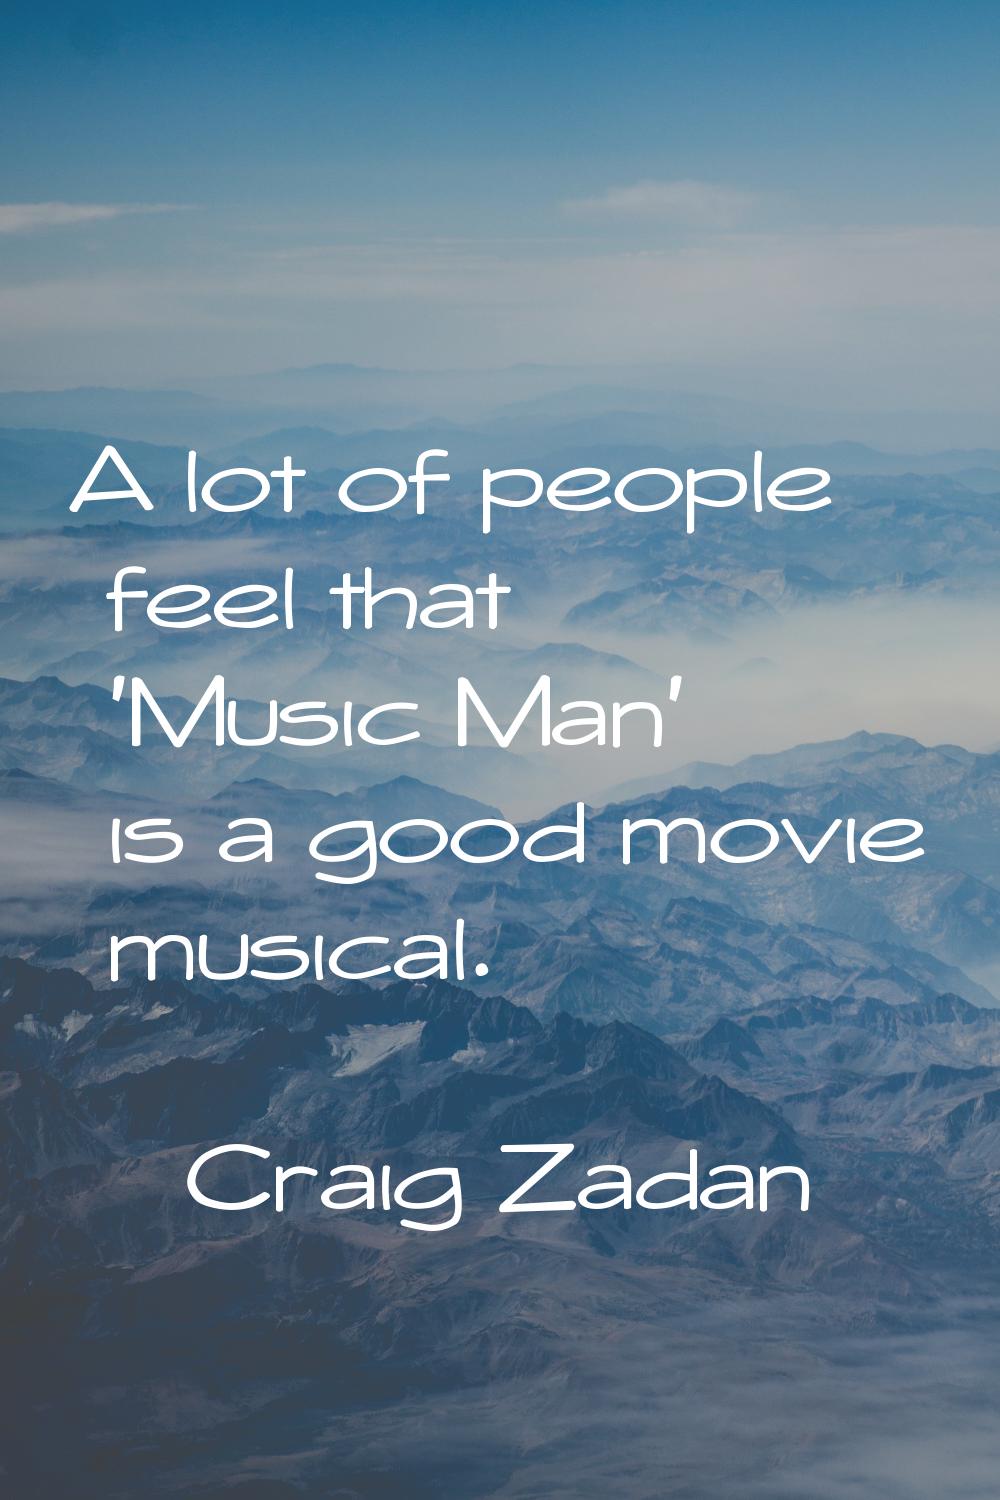 A lot of people feel that 'Music Man' is a good movie musical.